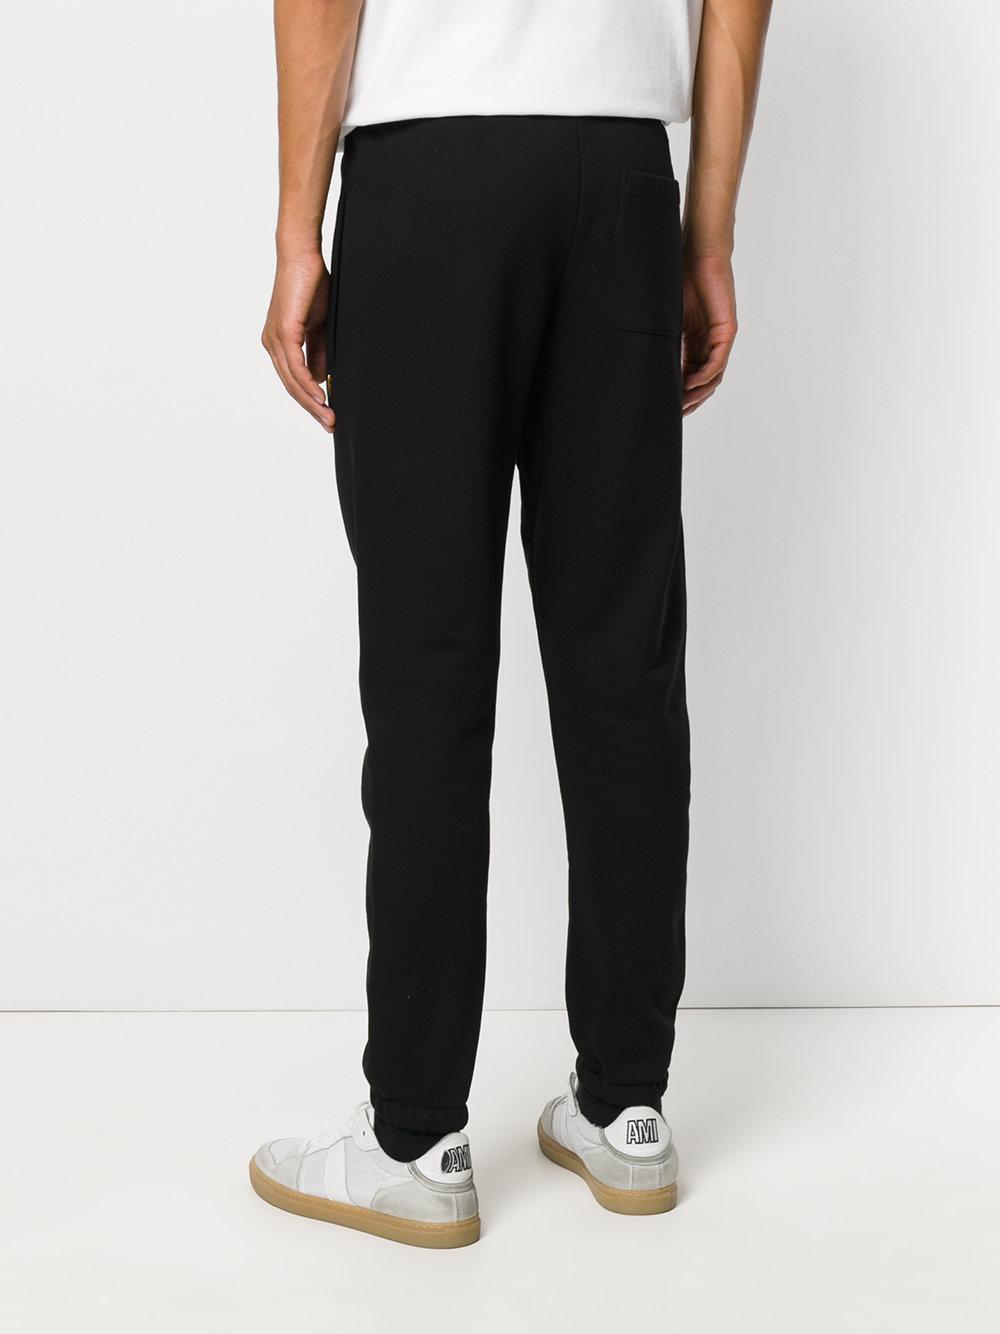 Lyst - Carhartt Chase Sweat Pants in Black for Men